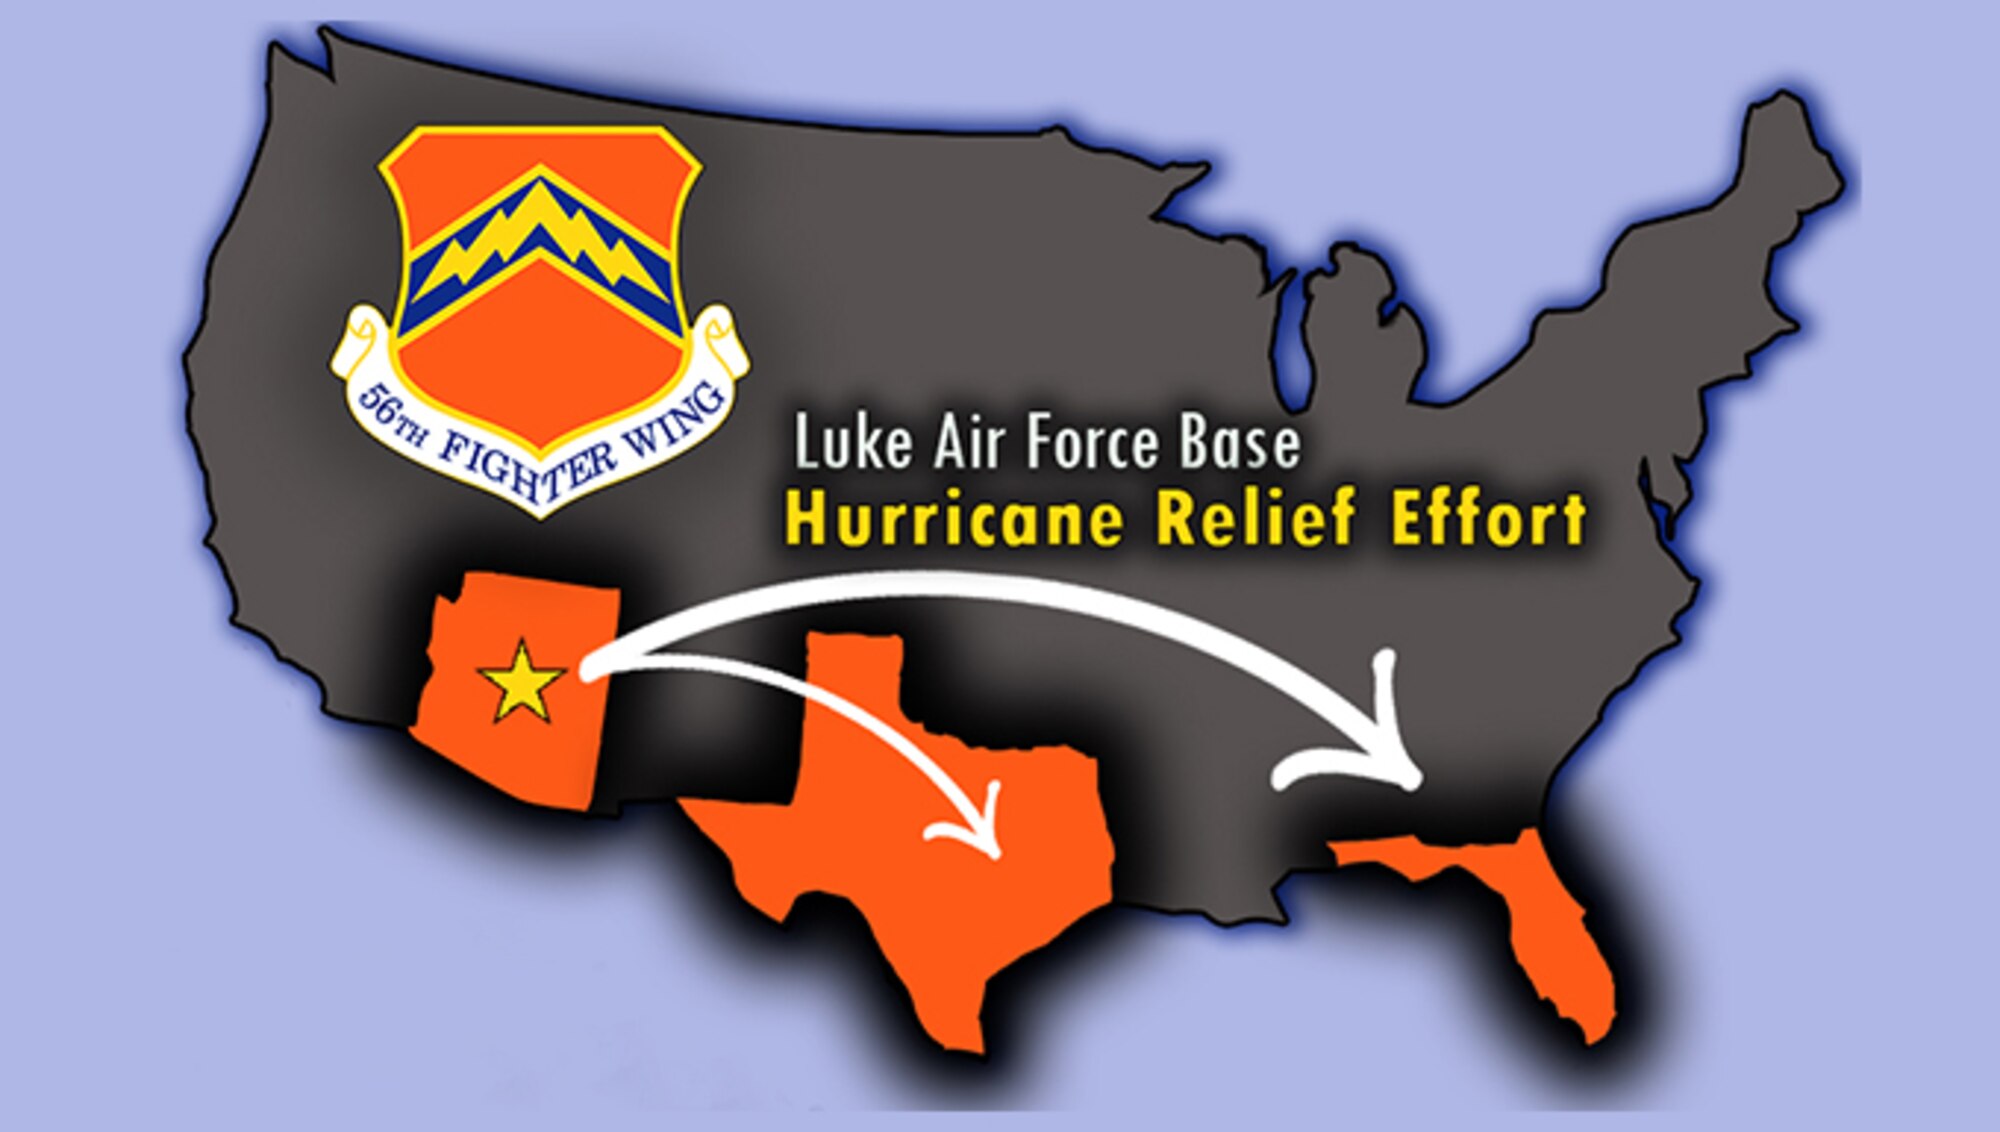 A donation drive is taking place at Luke Air Force Base, Ariz. until October 1st in conjunction with Saint Mary’s Food Bank Alliance to assist families in need who have been afflicted by the ongoing hurricane season.